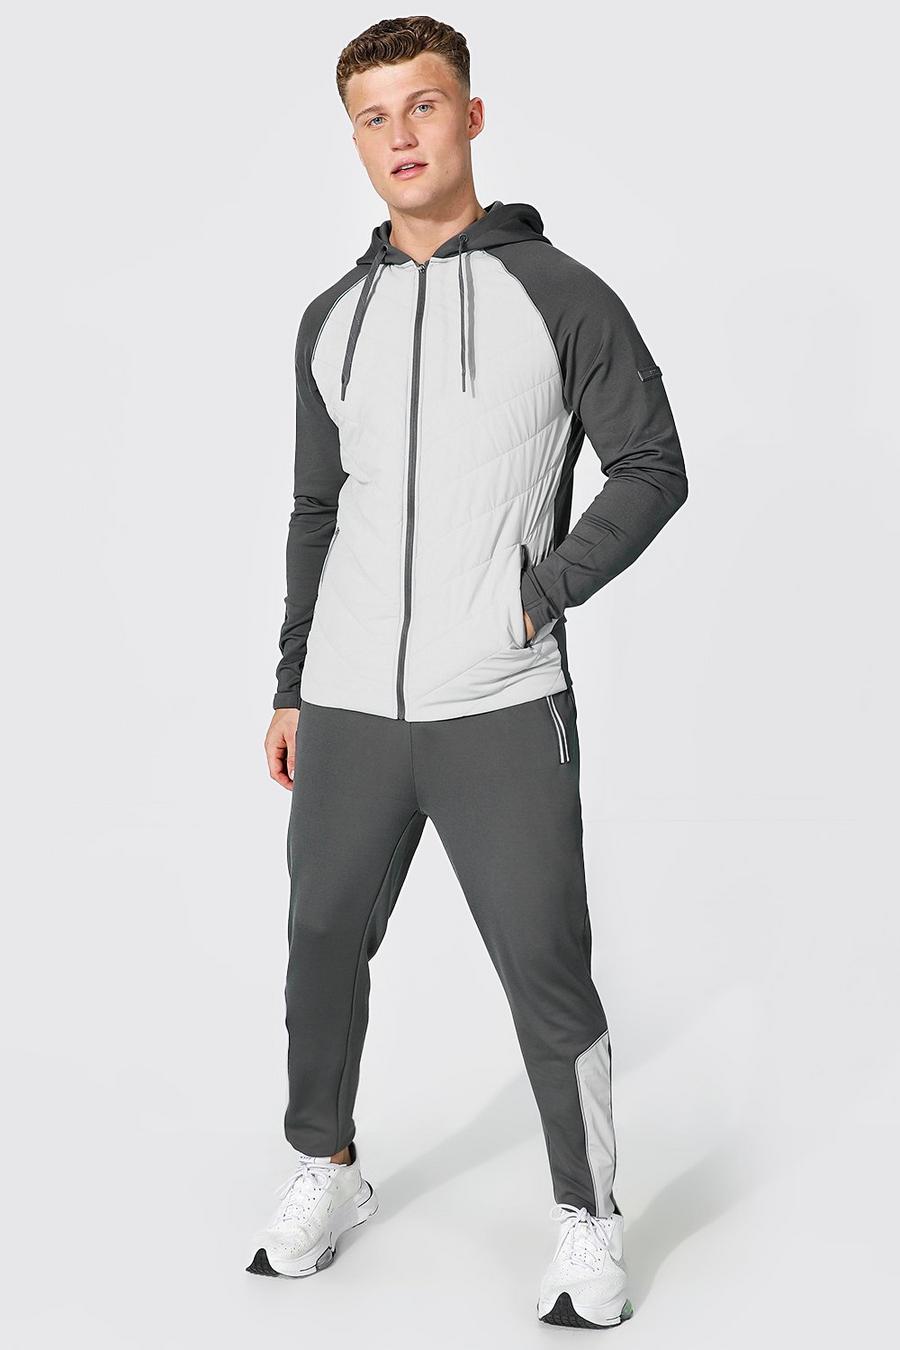 gym and workout clothes Grey for Men Boohoo Zip Hooded Tracksuit With Man Tape in Charcoal gym and workout clothes Boohoo Activewear Mens Activewear 